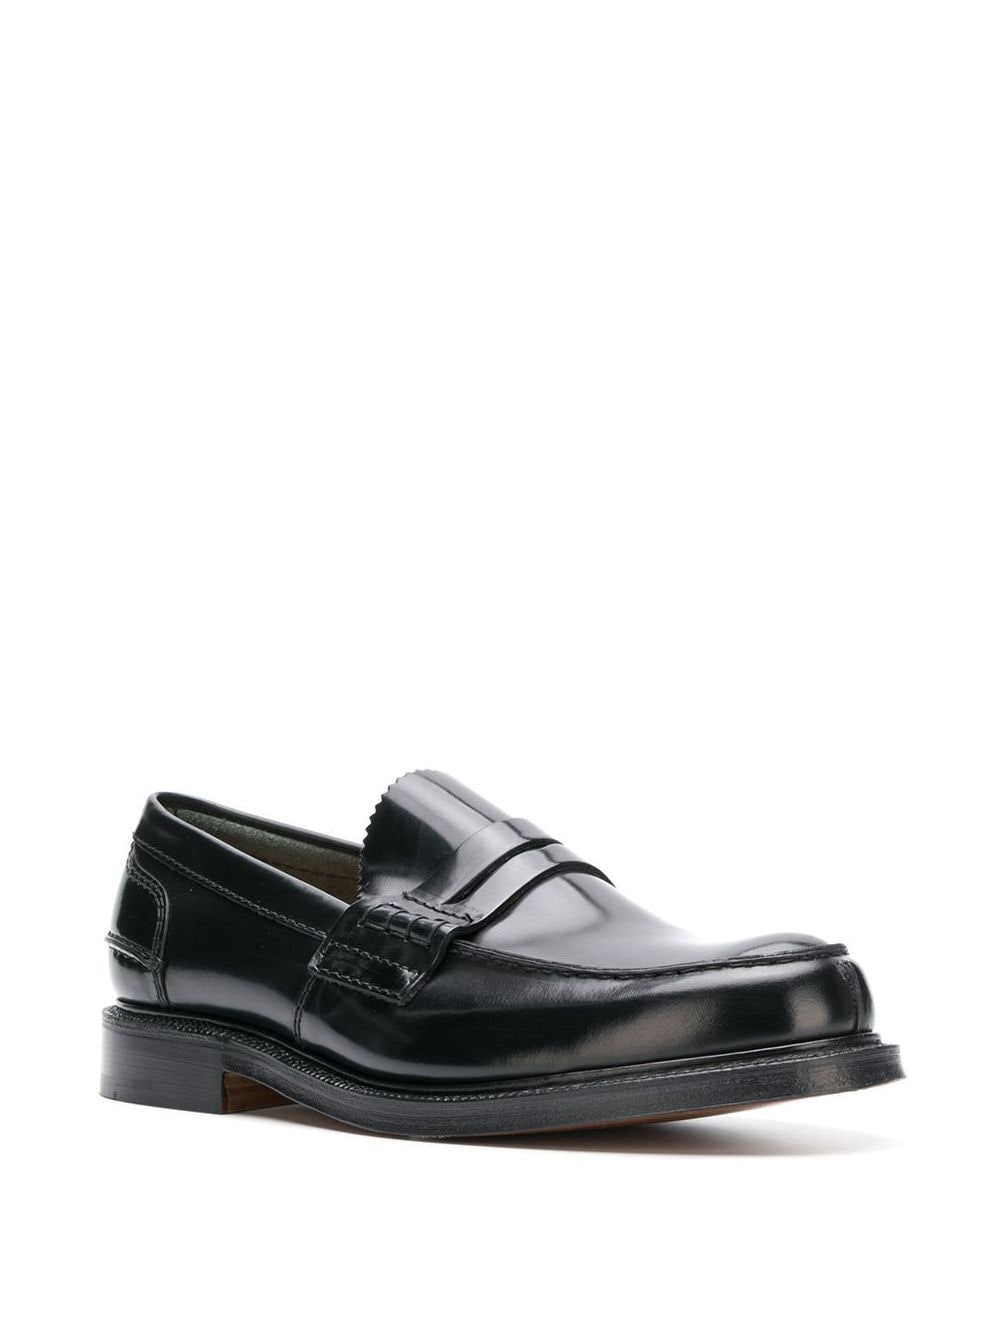 Shop Church's Willenhall loafers with Express Delivery - FARFETCH